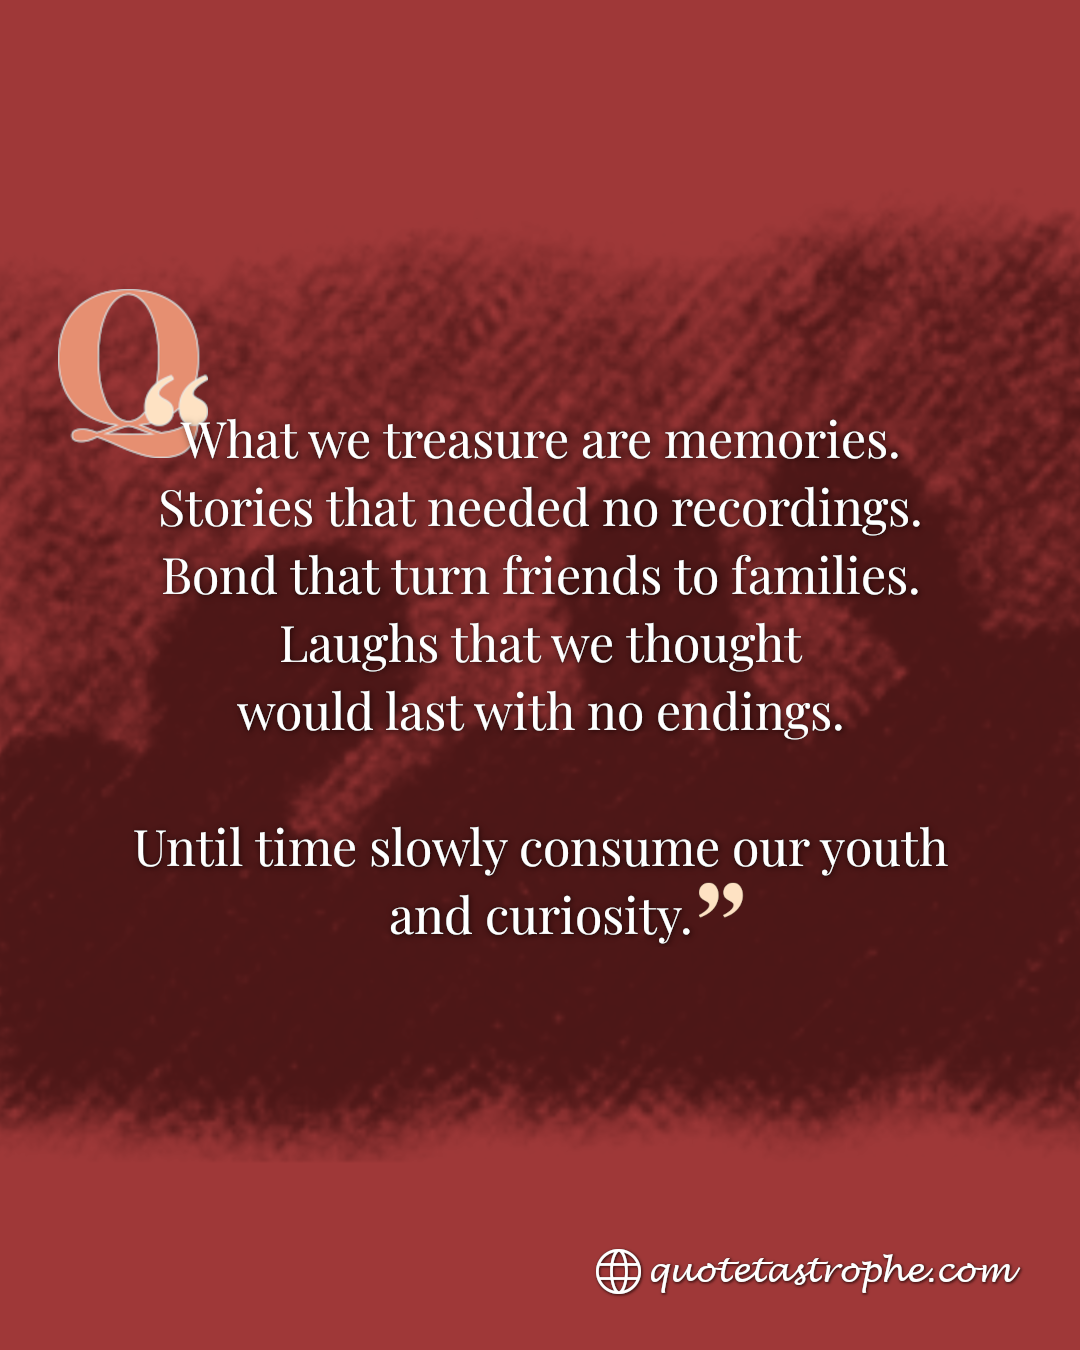 What We Treasure are Stories that Needed No Recordings